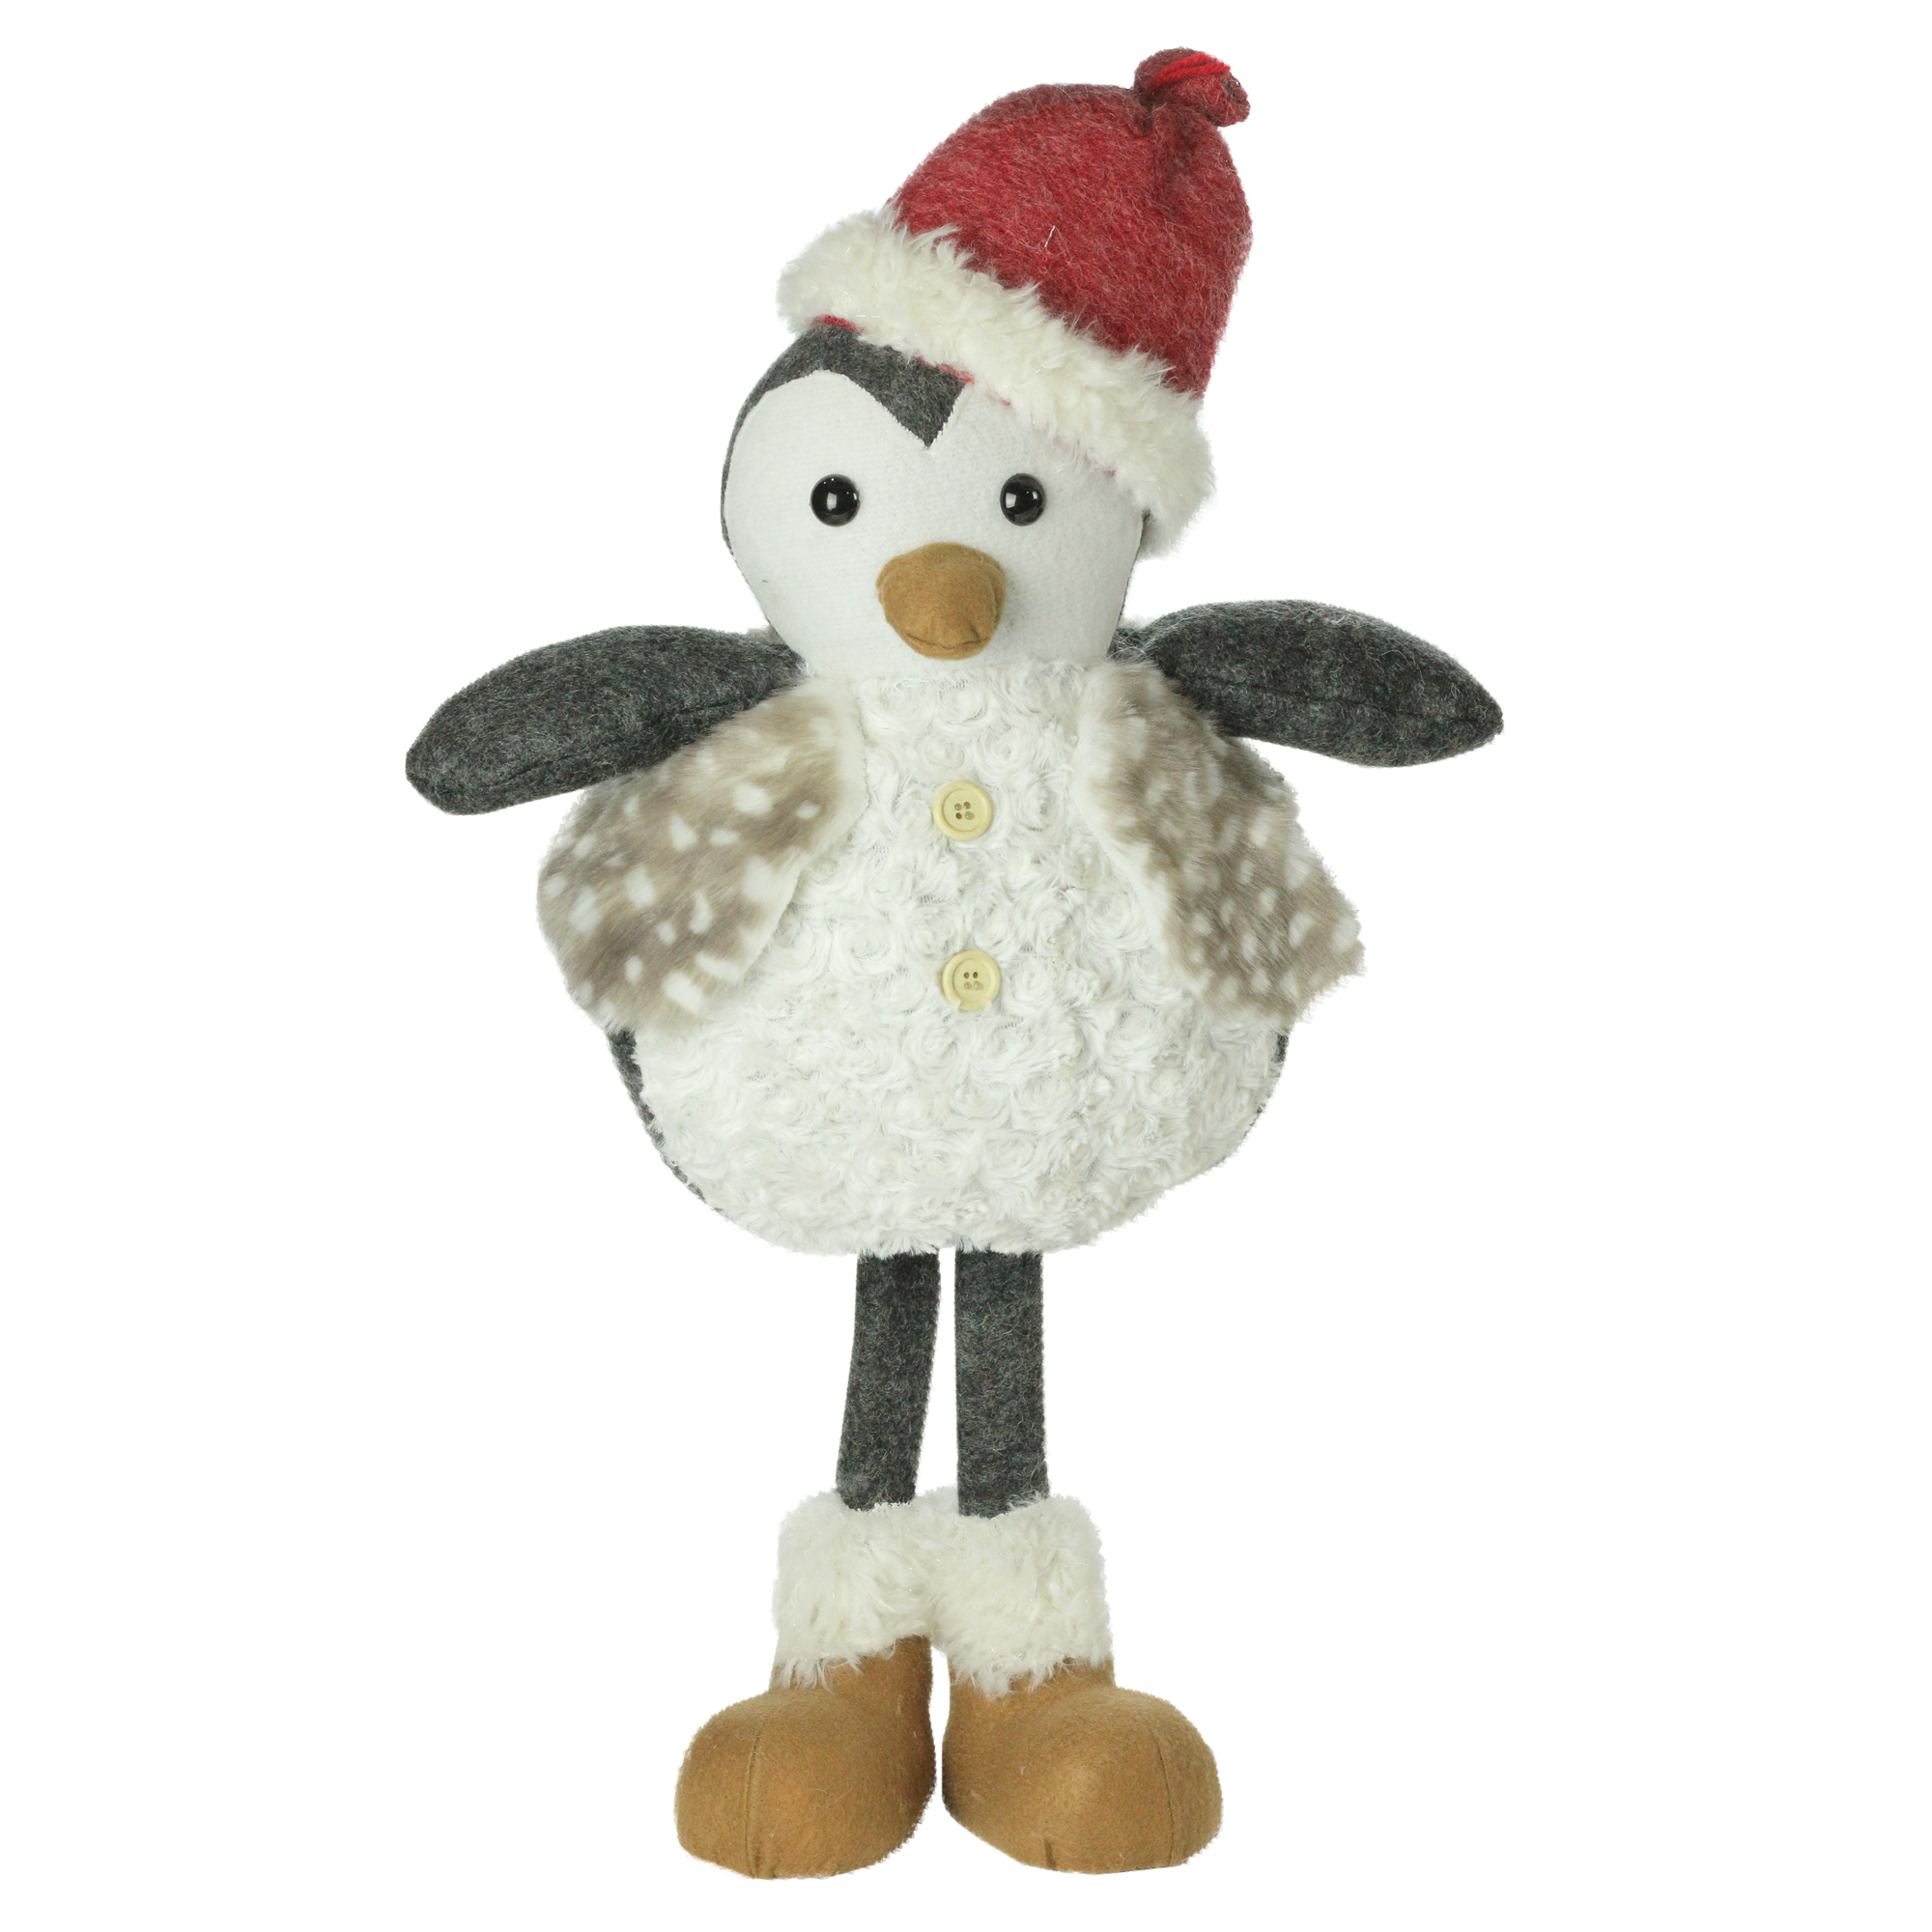 Northlight 24" Gray and White Sitting Penguin with Beanie Santa Hat Christmas Figurine